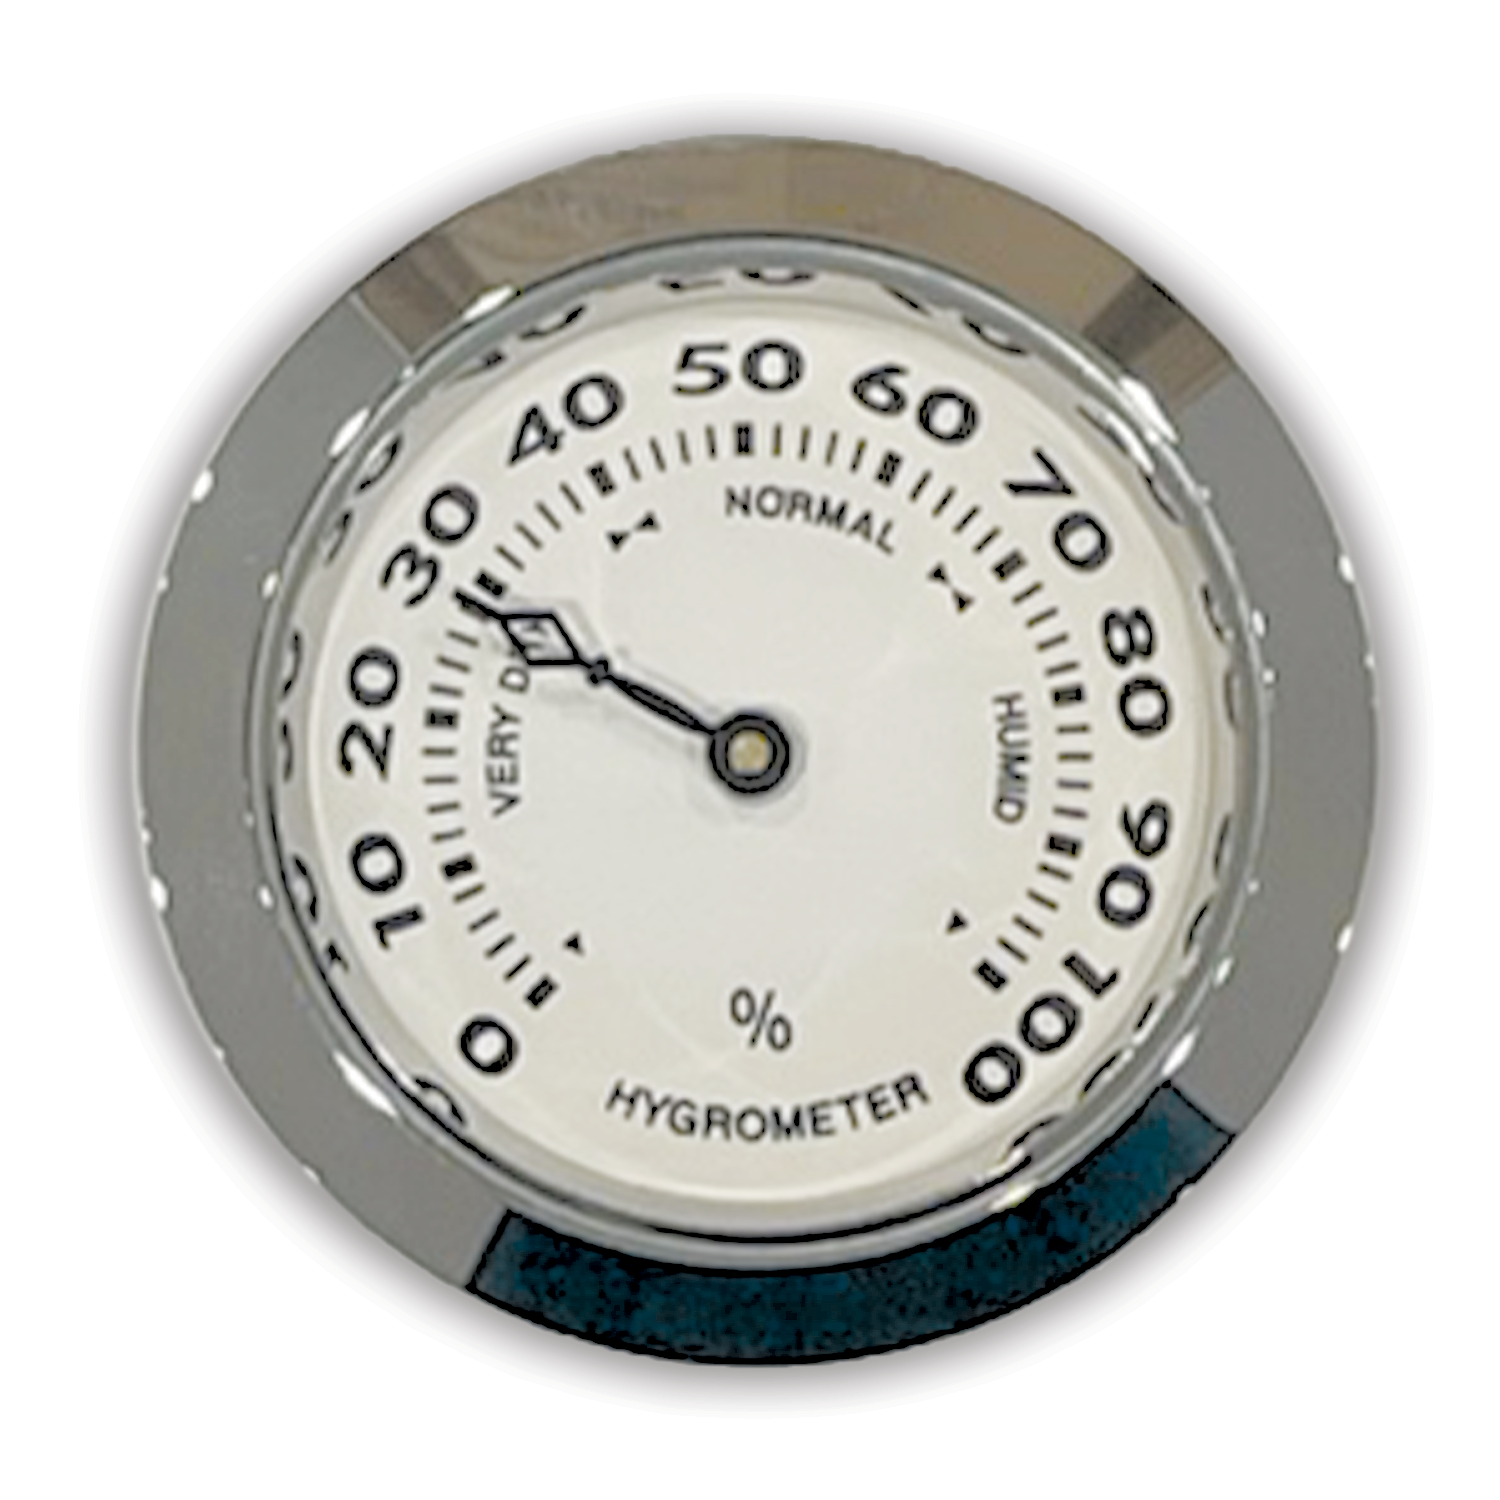 What does a hygrometer measure?